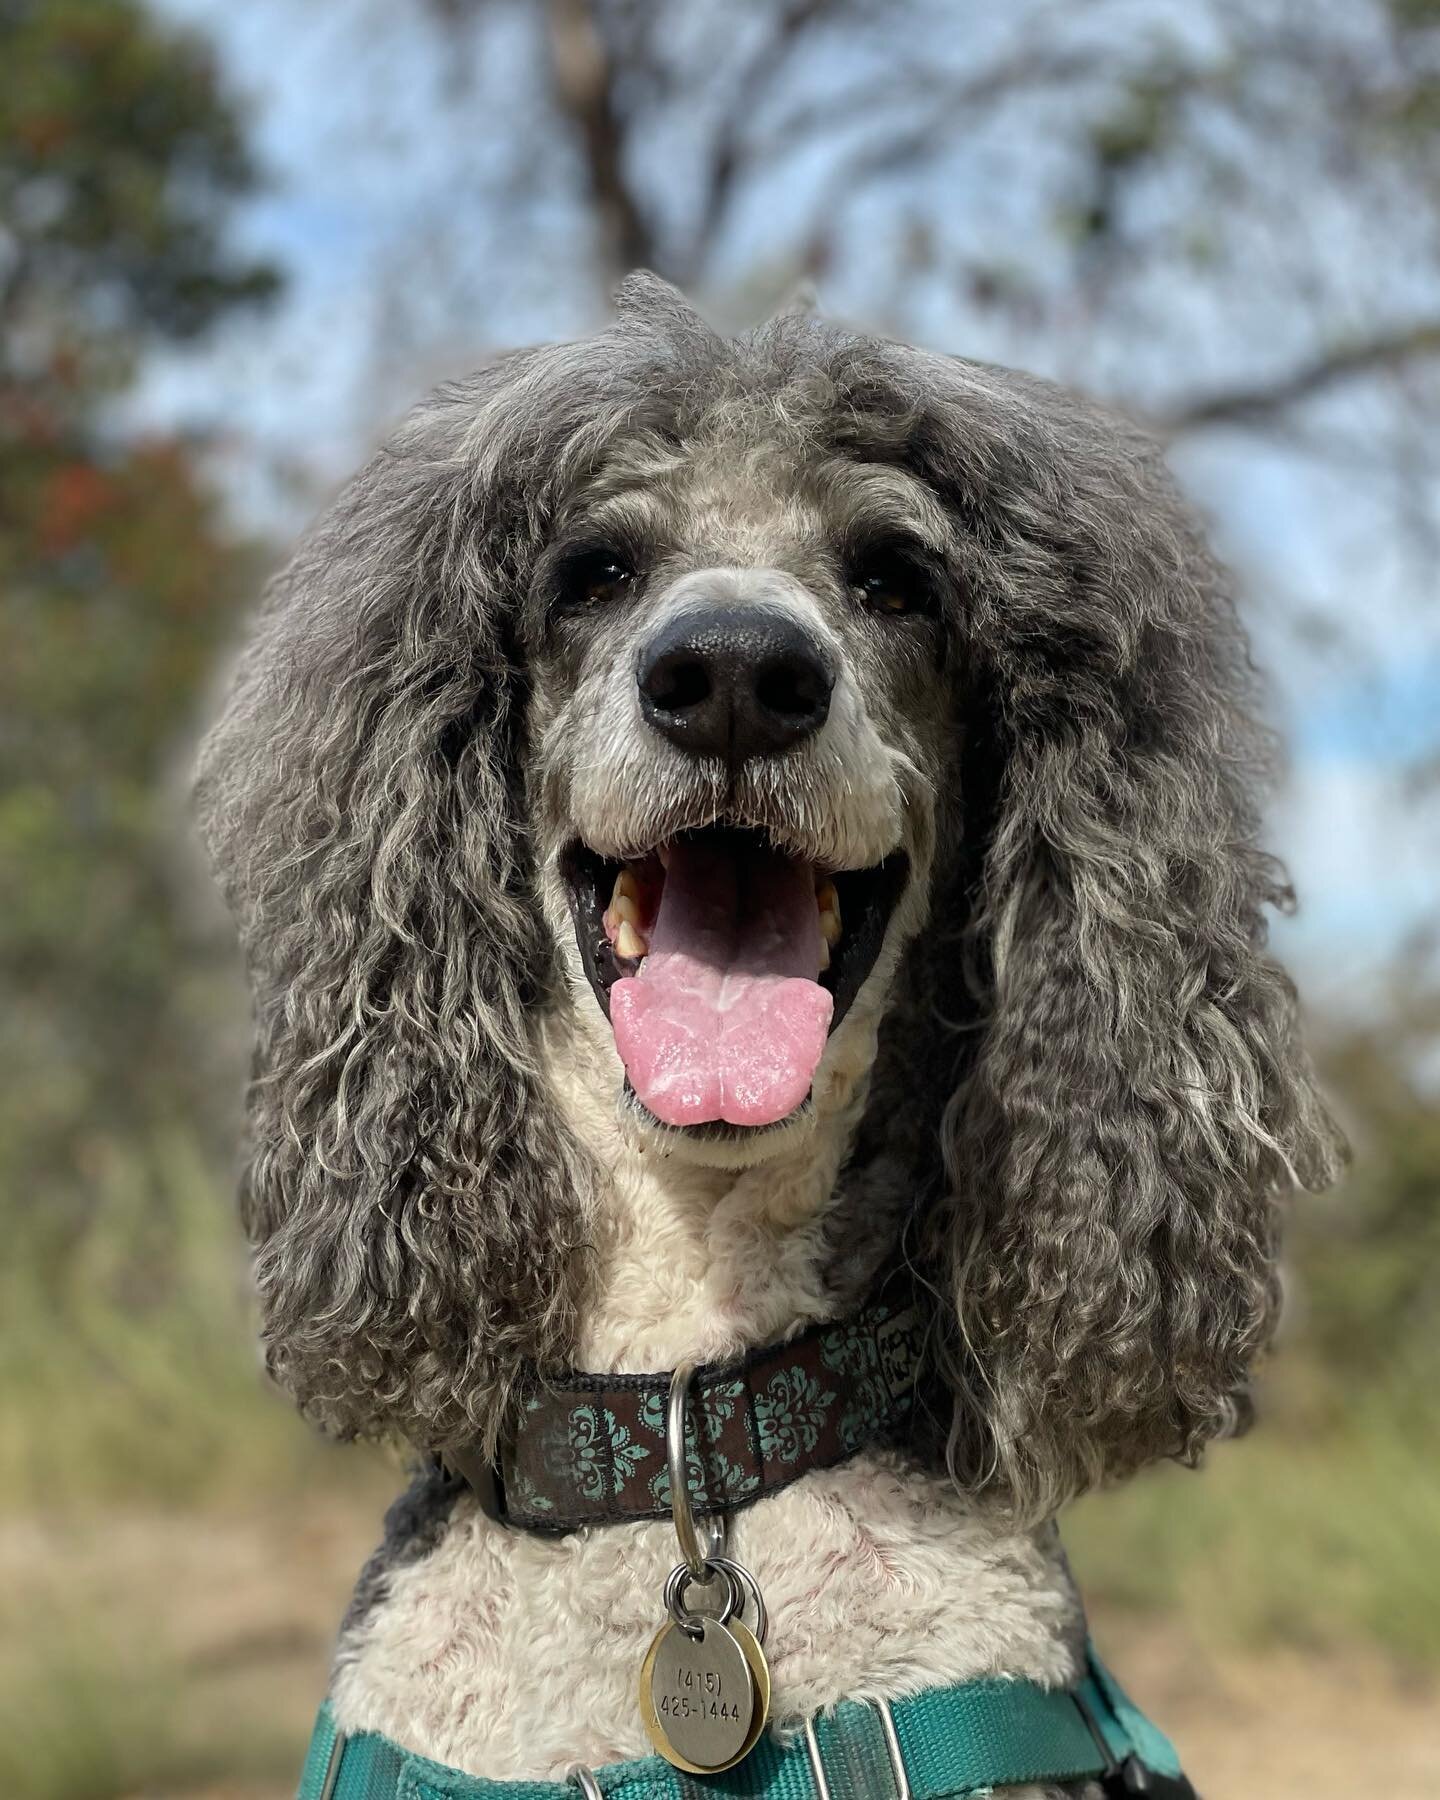 We are so happy to have Sprocket join our crew! He is the funniest fluffer nutter! #marincanineadventures #doglife #happydog #dogsofinsta #dogsofinstagram #dogohotography #marindogs #traildogs #hikewithdogs #outdoordogs #poodle #poodles #poodlesofins